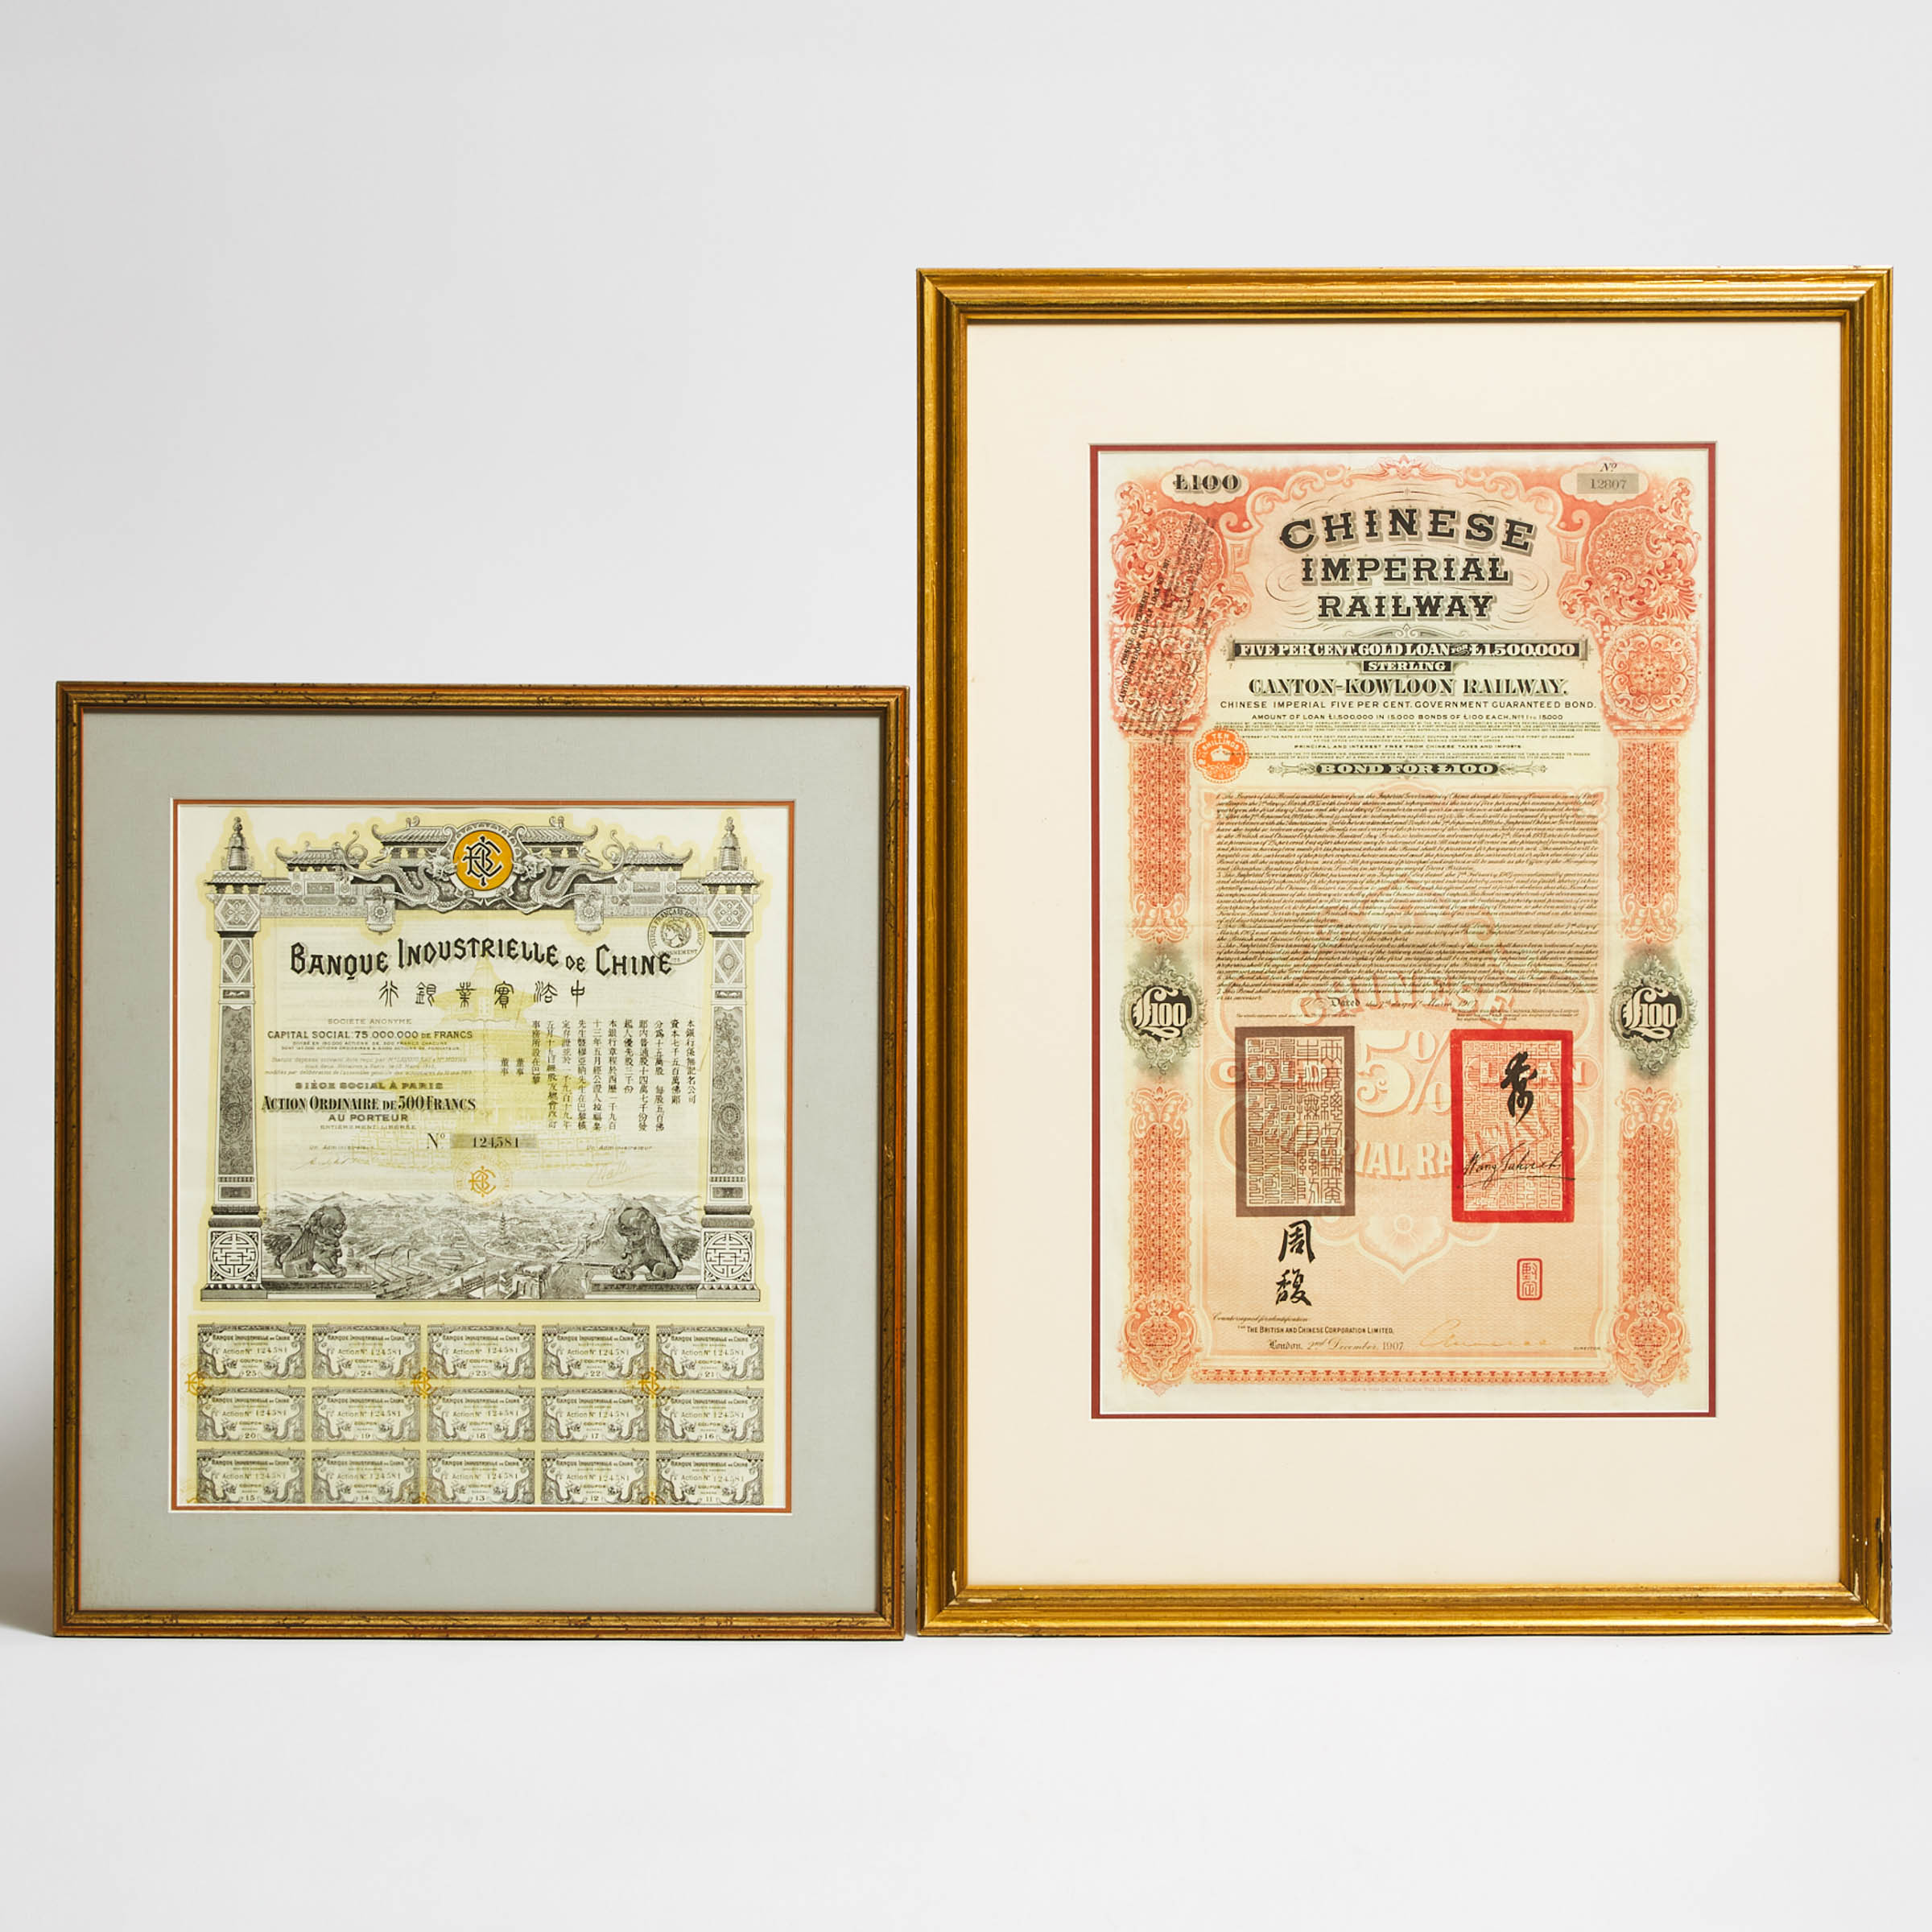 A Chinese Imperial Railway Bond, Canton to Kowloon, 1907, Together With a Banque Industrielle de Chine Share Certificate and Coupons, 1913